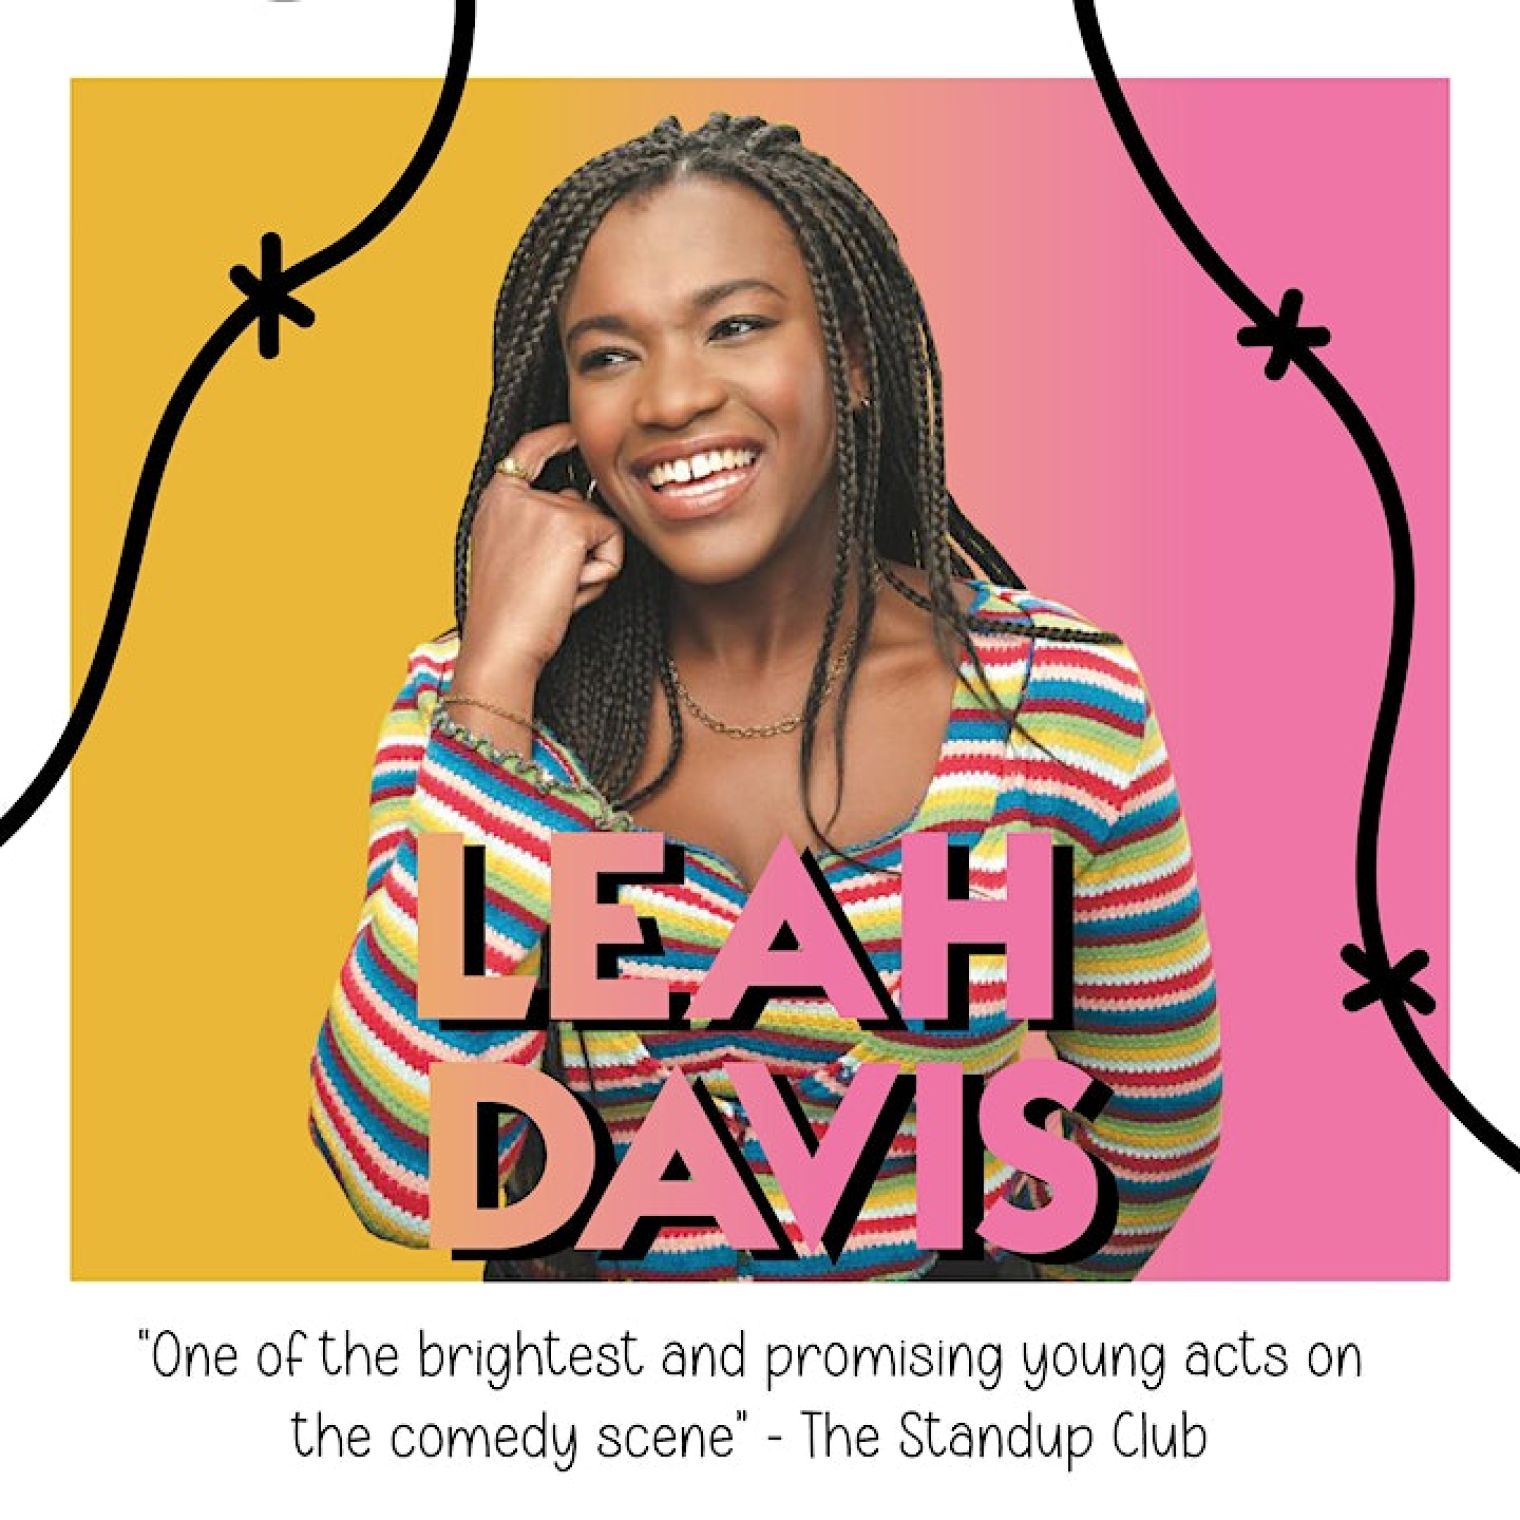 Comedian & presenter Leah Davis is performing at a special one-off comedy night in aid of Amnesty International tonight in Islington